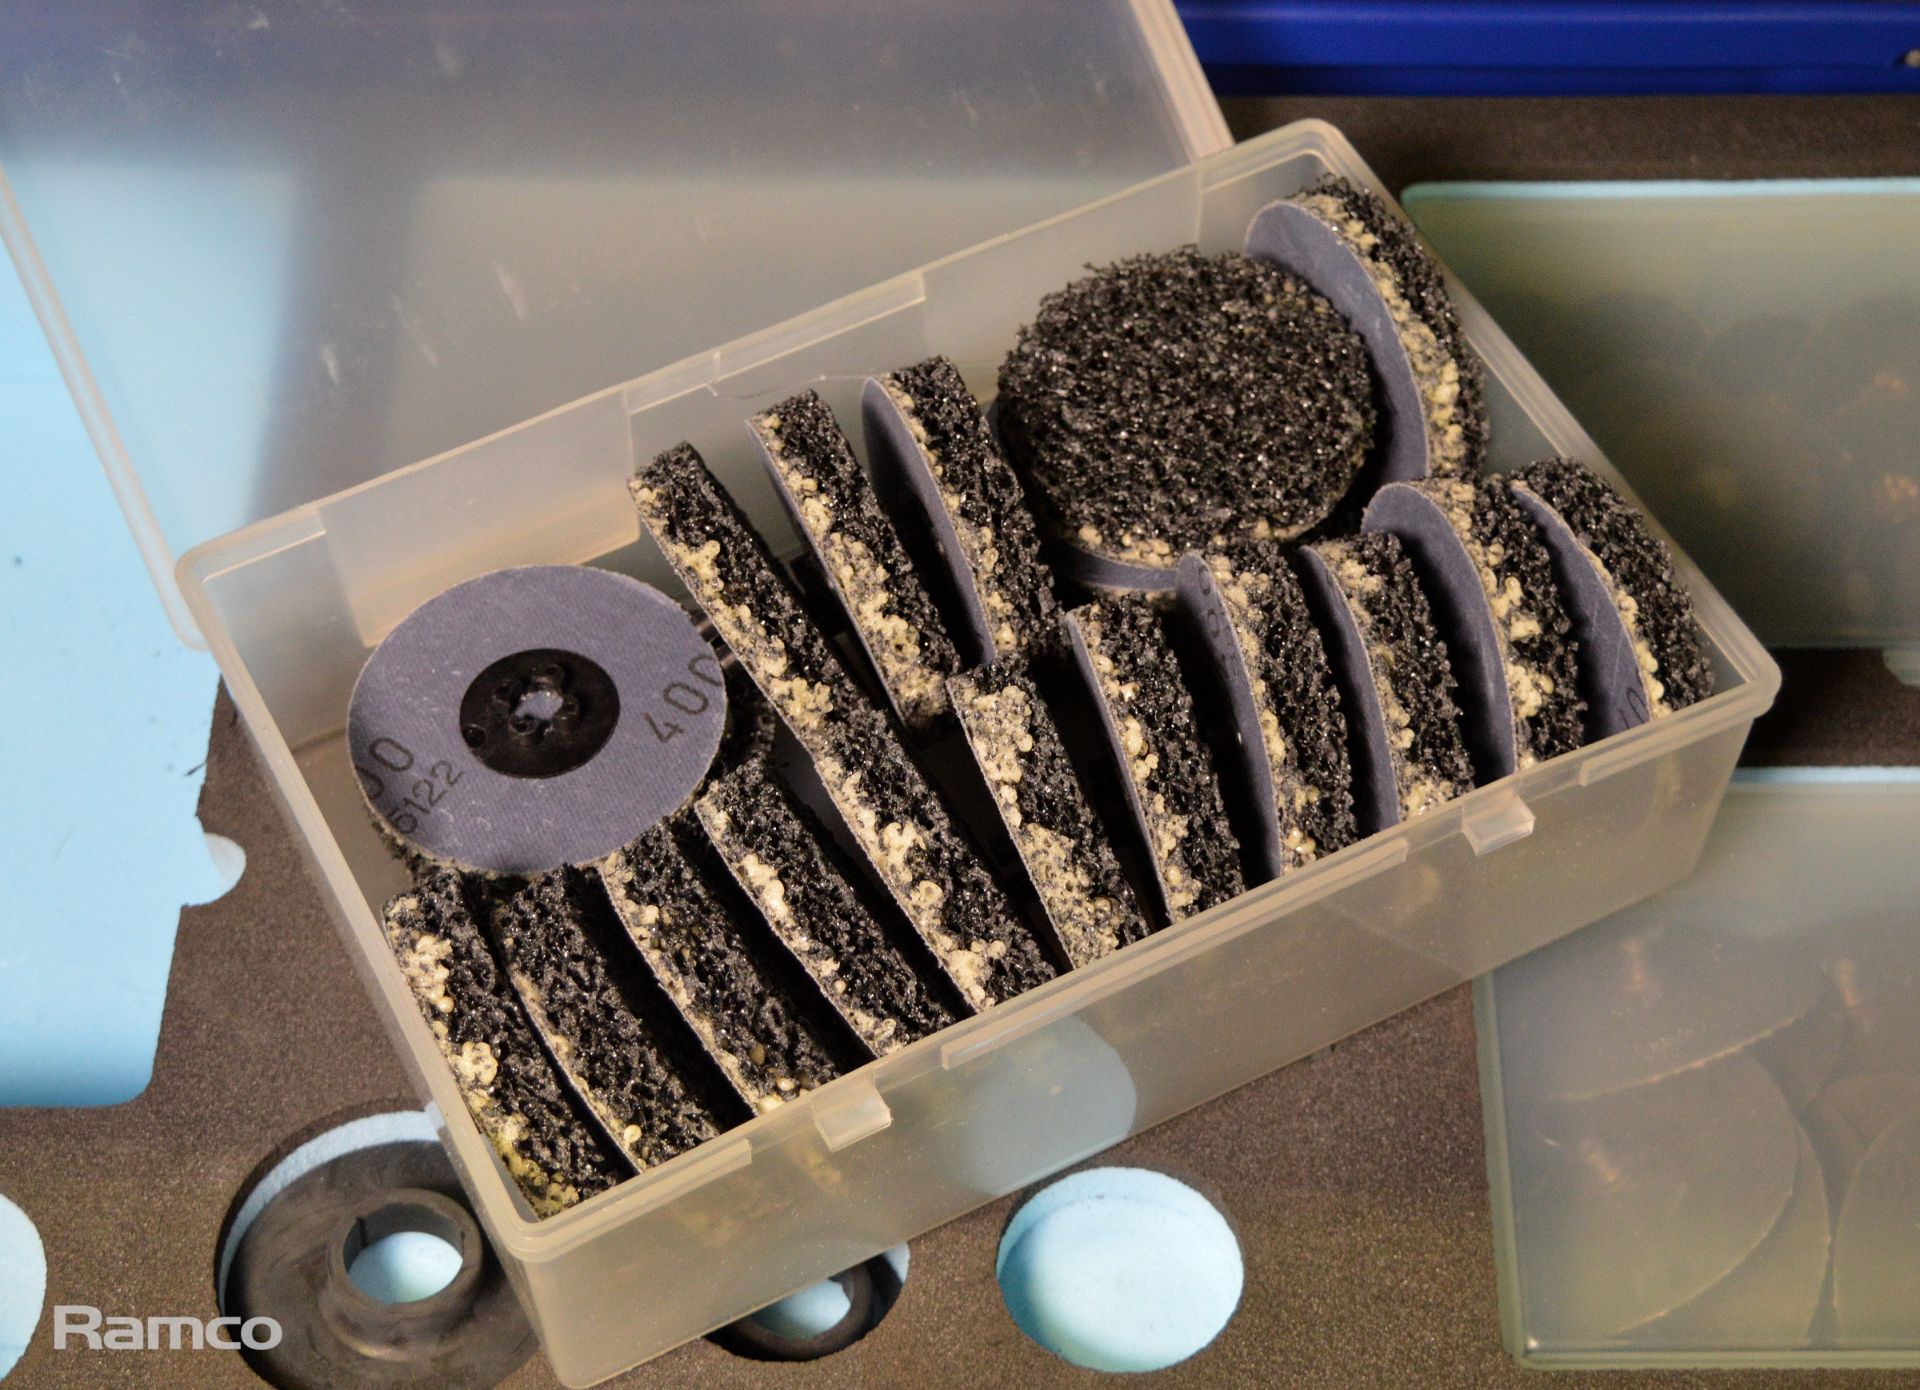 Corrosion removal kit in carry case - Image 3 of 7